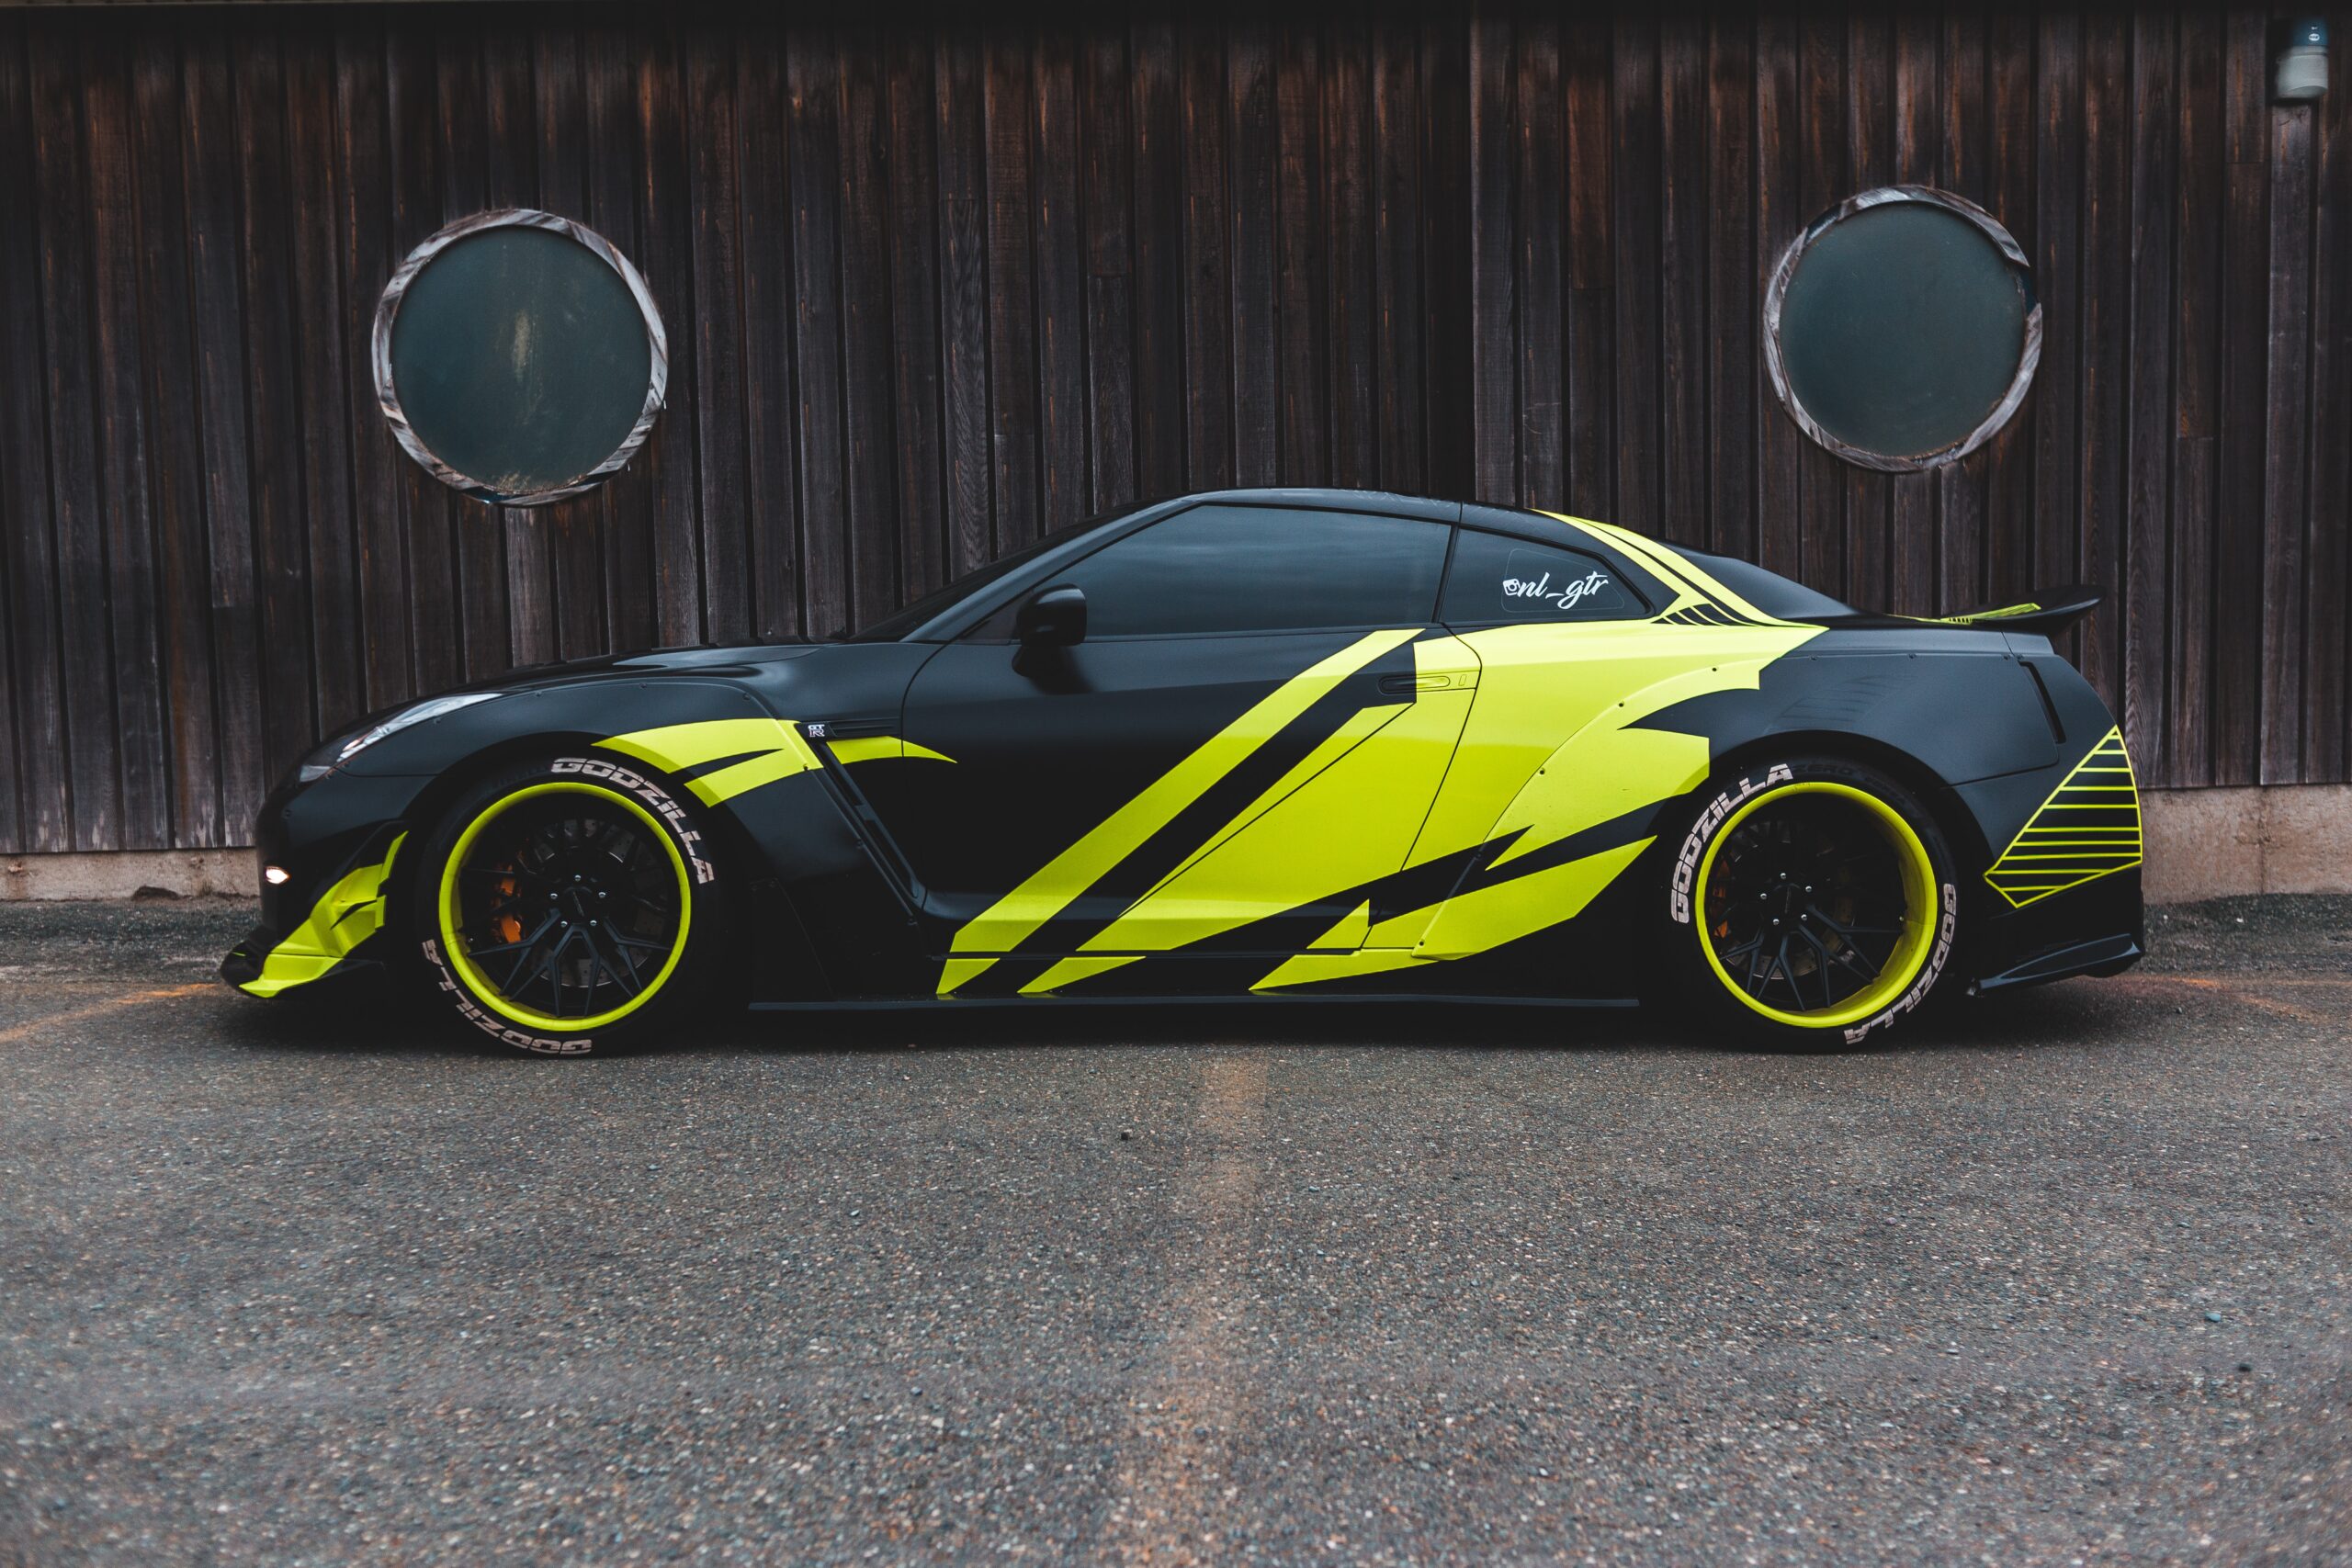 10 Eye-catching Vehicle Wrap Designs that Will Turn Heads on the Road